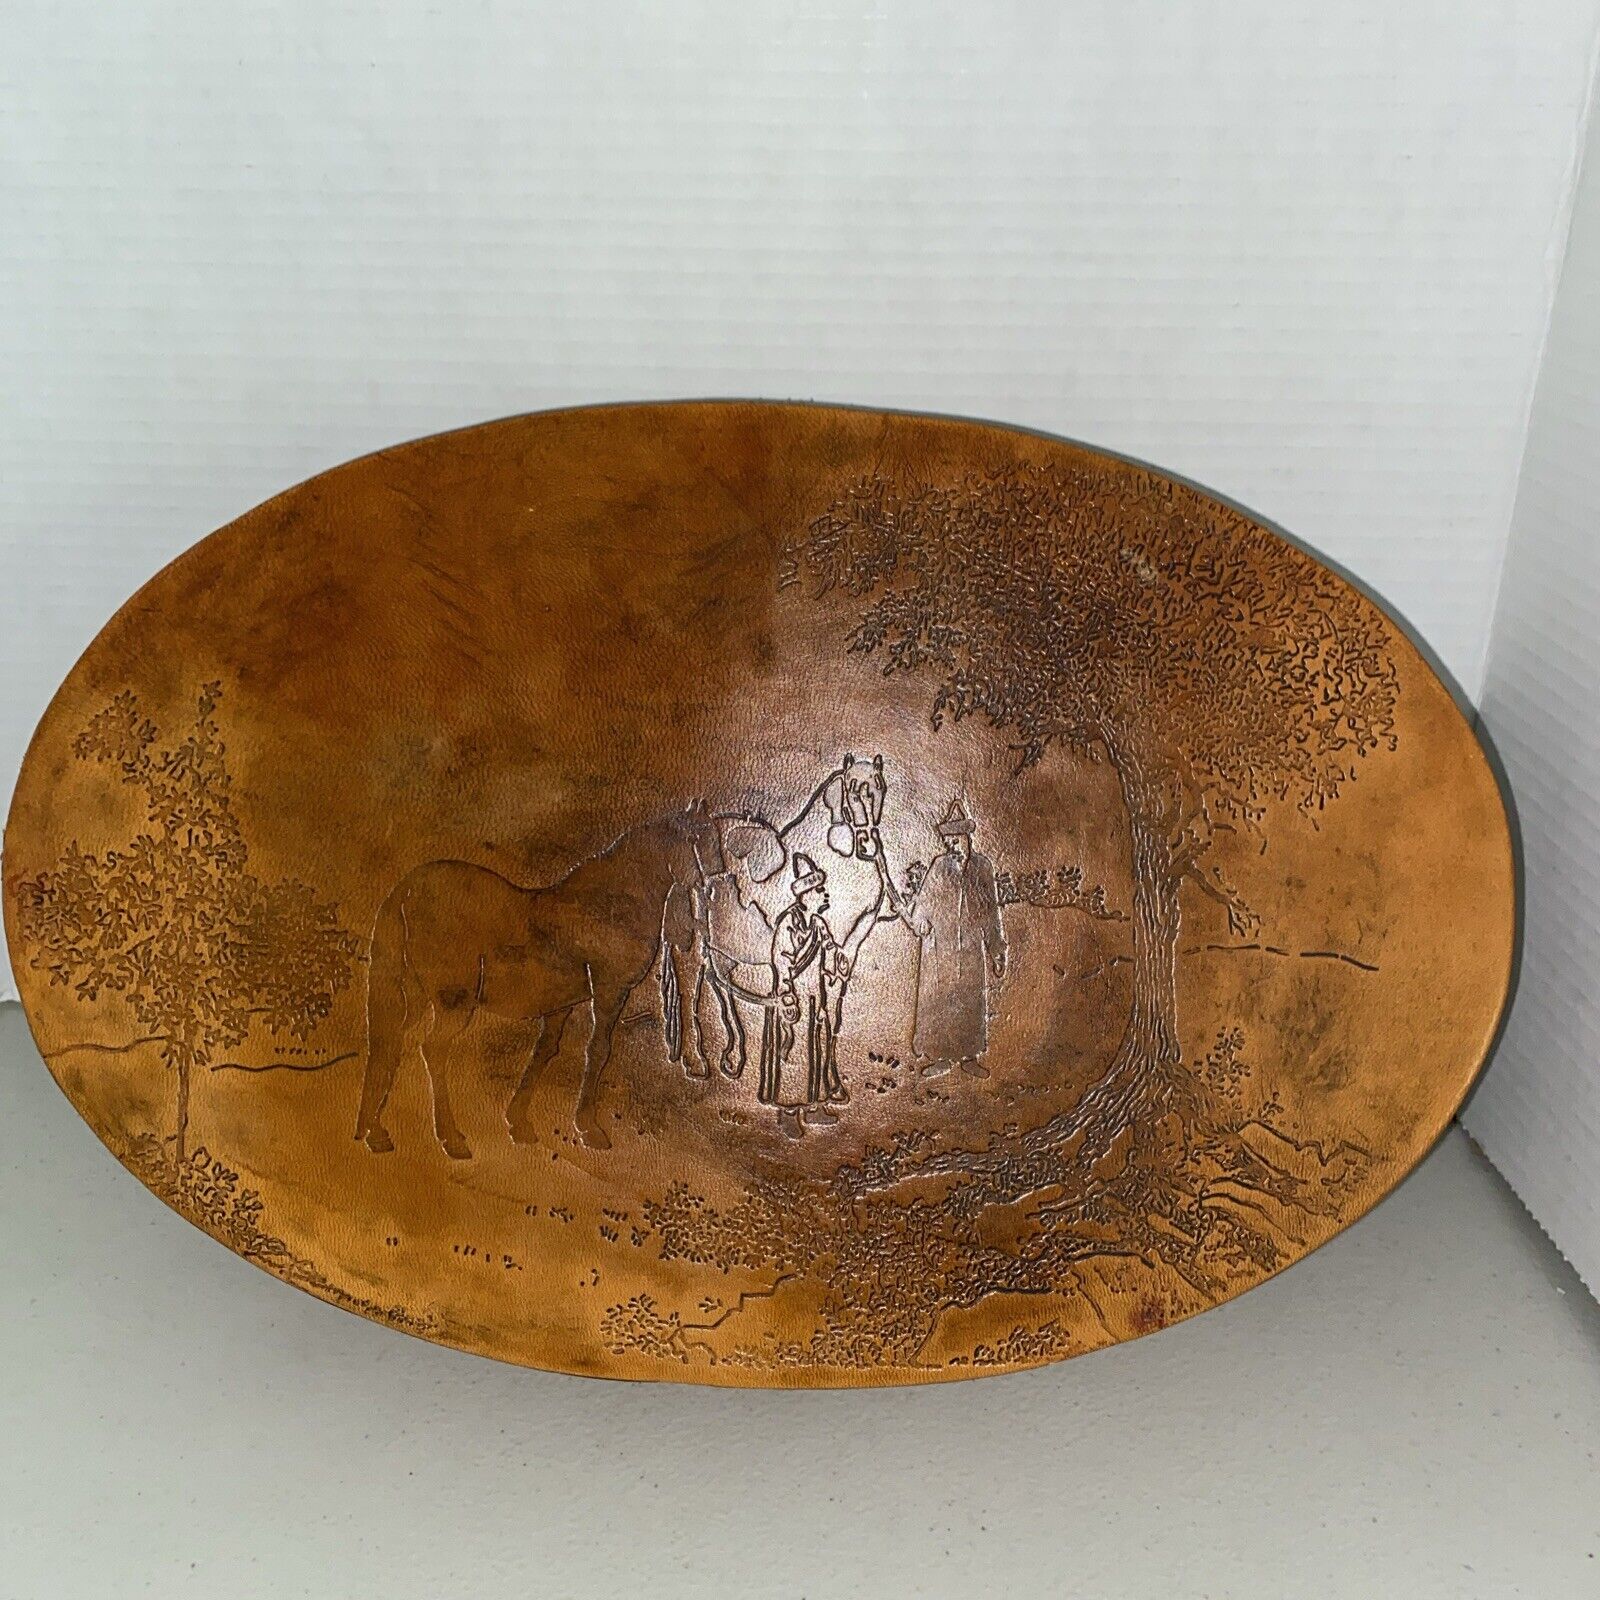 Vintage Wildwood Leather Over Wood Large Oval Box 13” X 9” Embossed Horses & Men